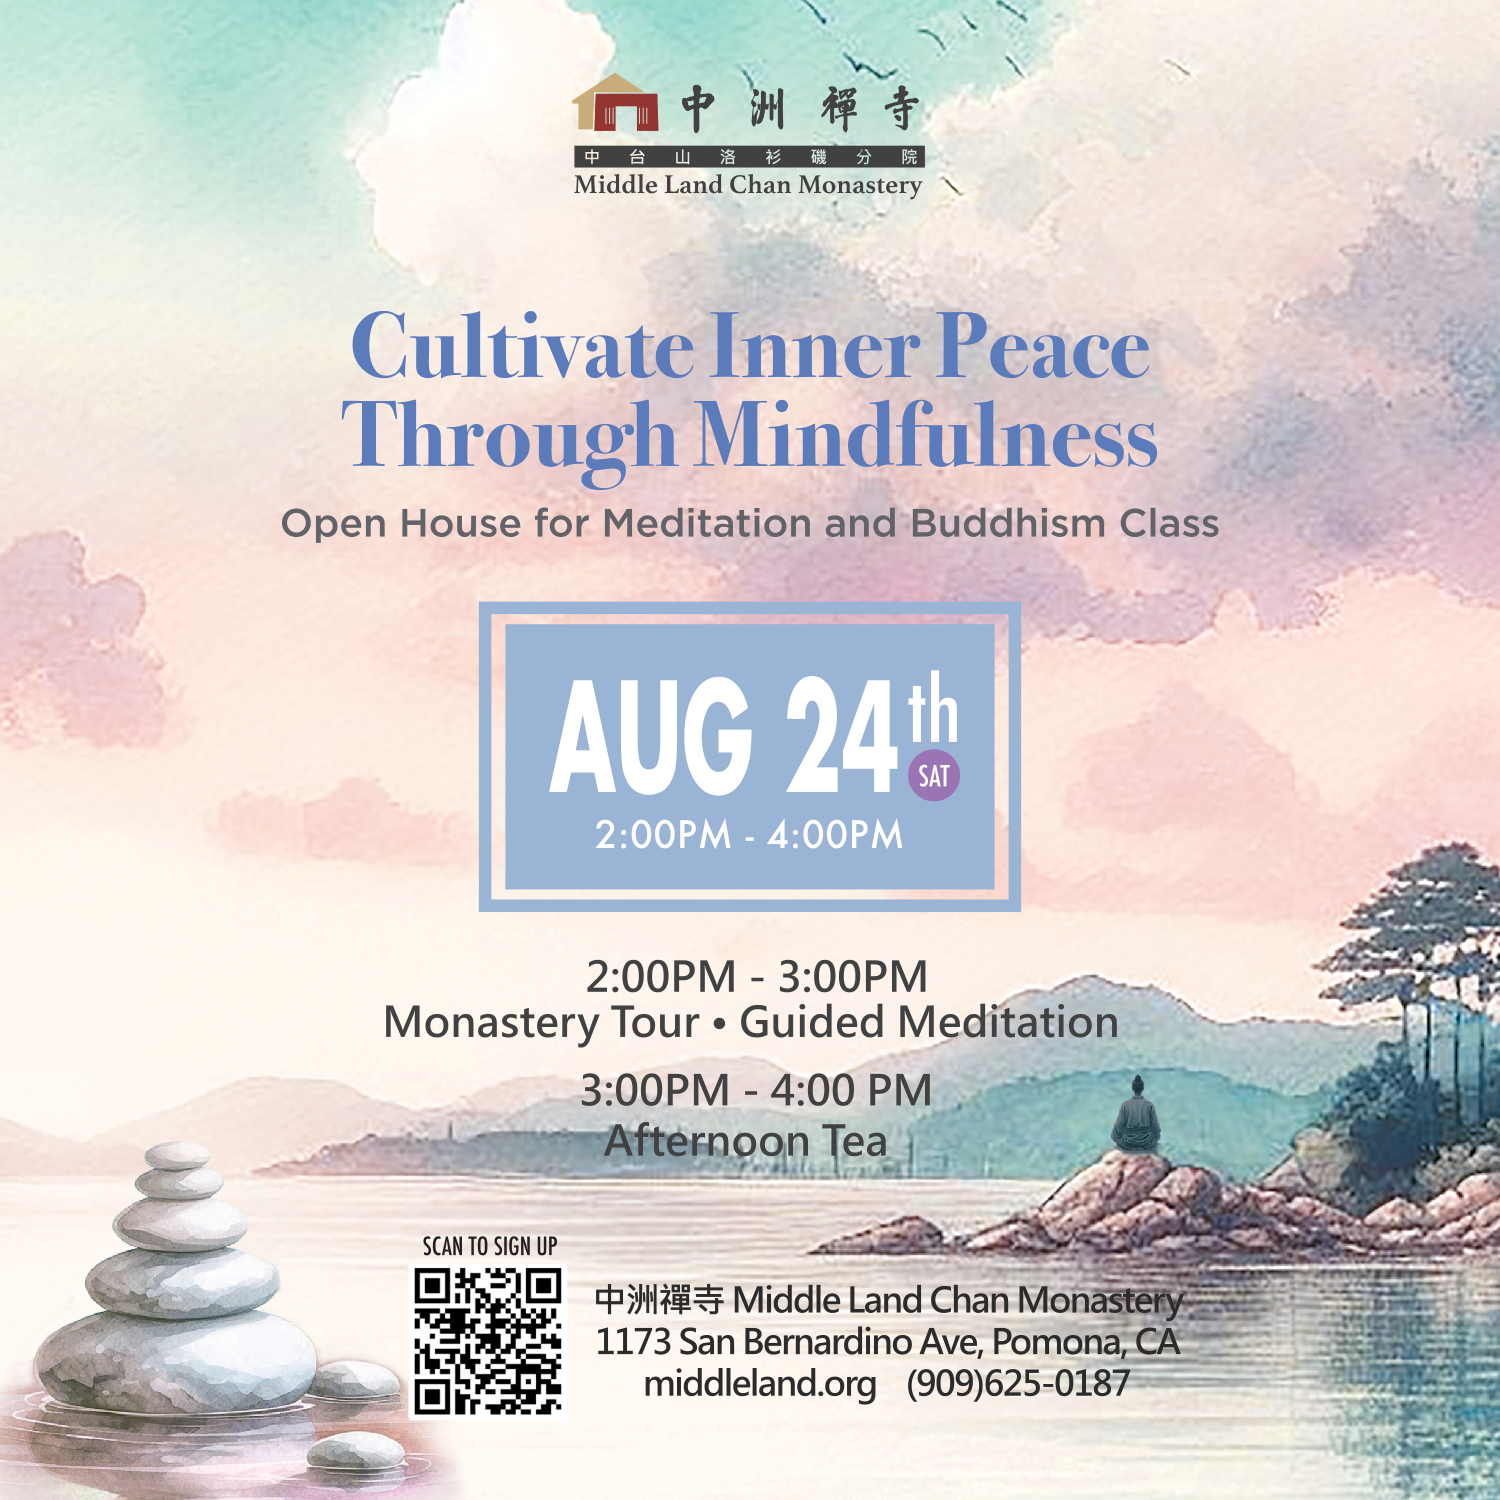 Open House for Meditation and Buddhism Class